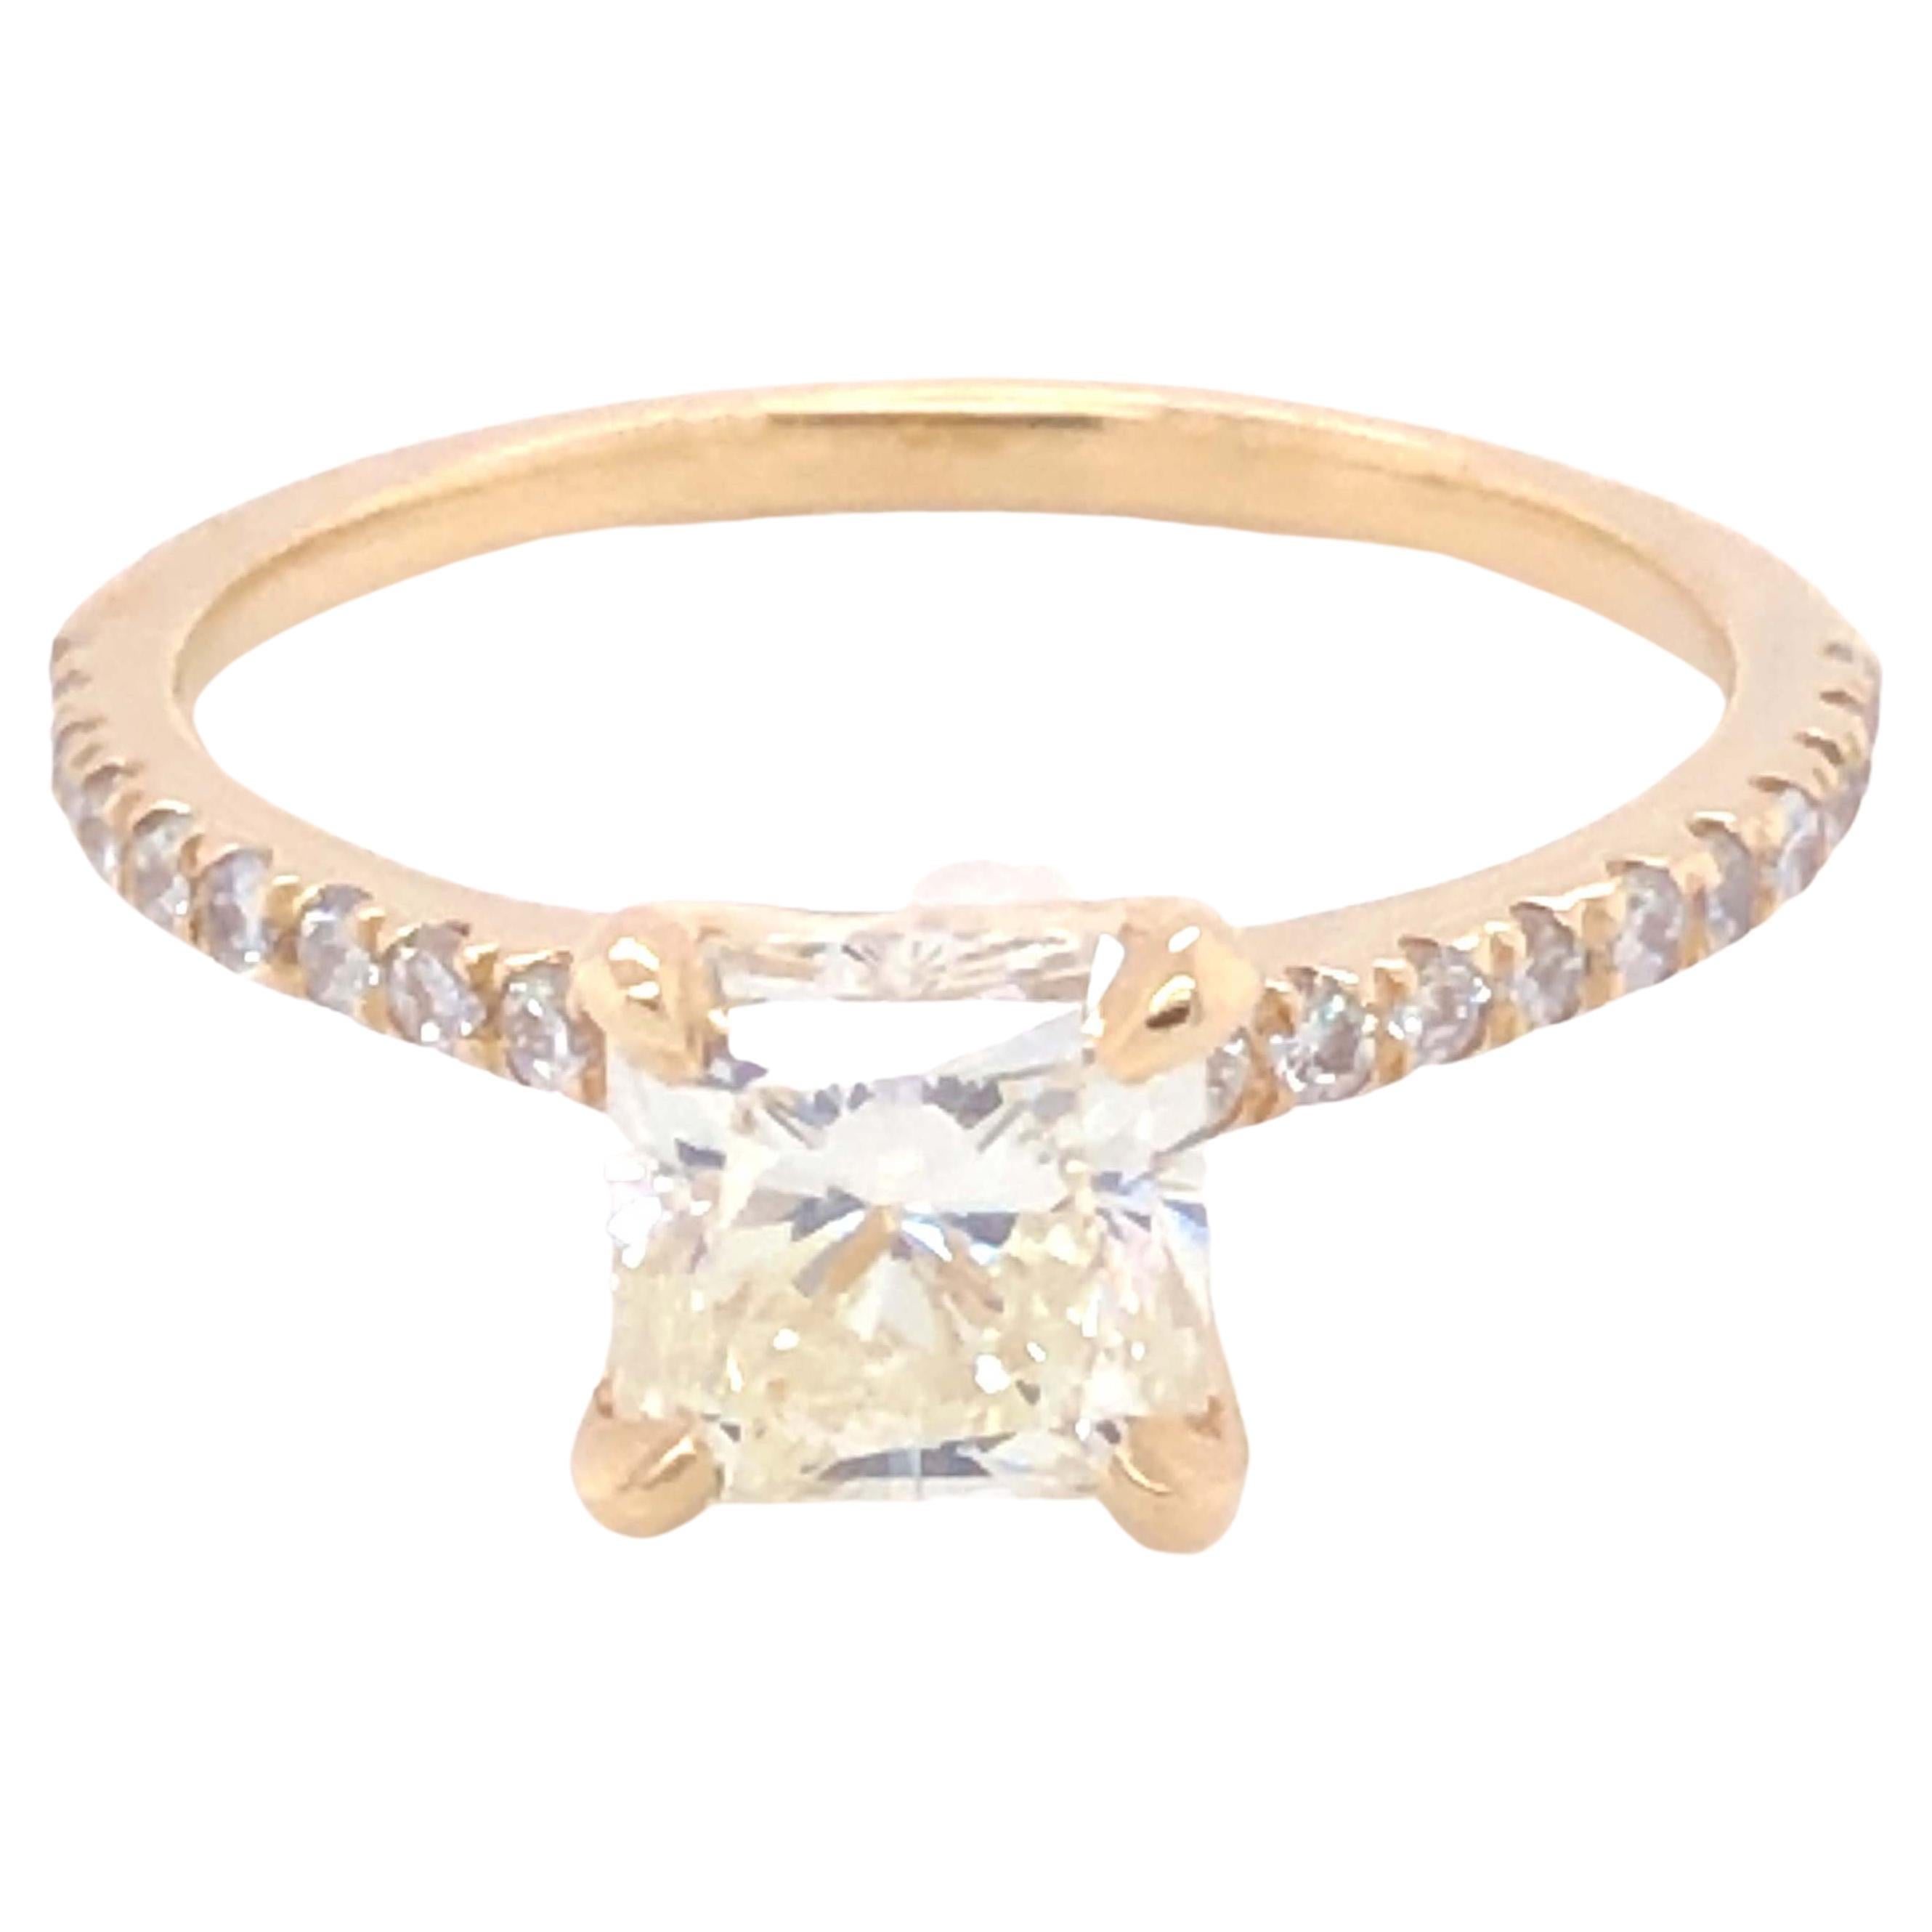 Radiant Cut 1.23 Carat Center Stone Diamond Engagement Ring, 14k Yellow Gold For Sale